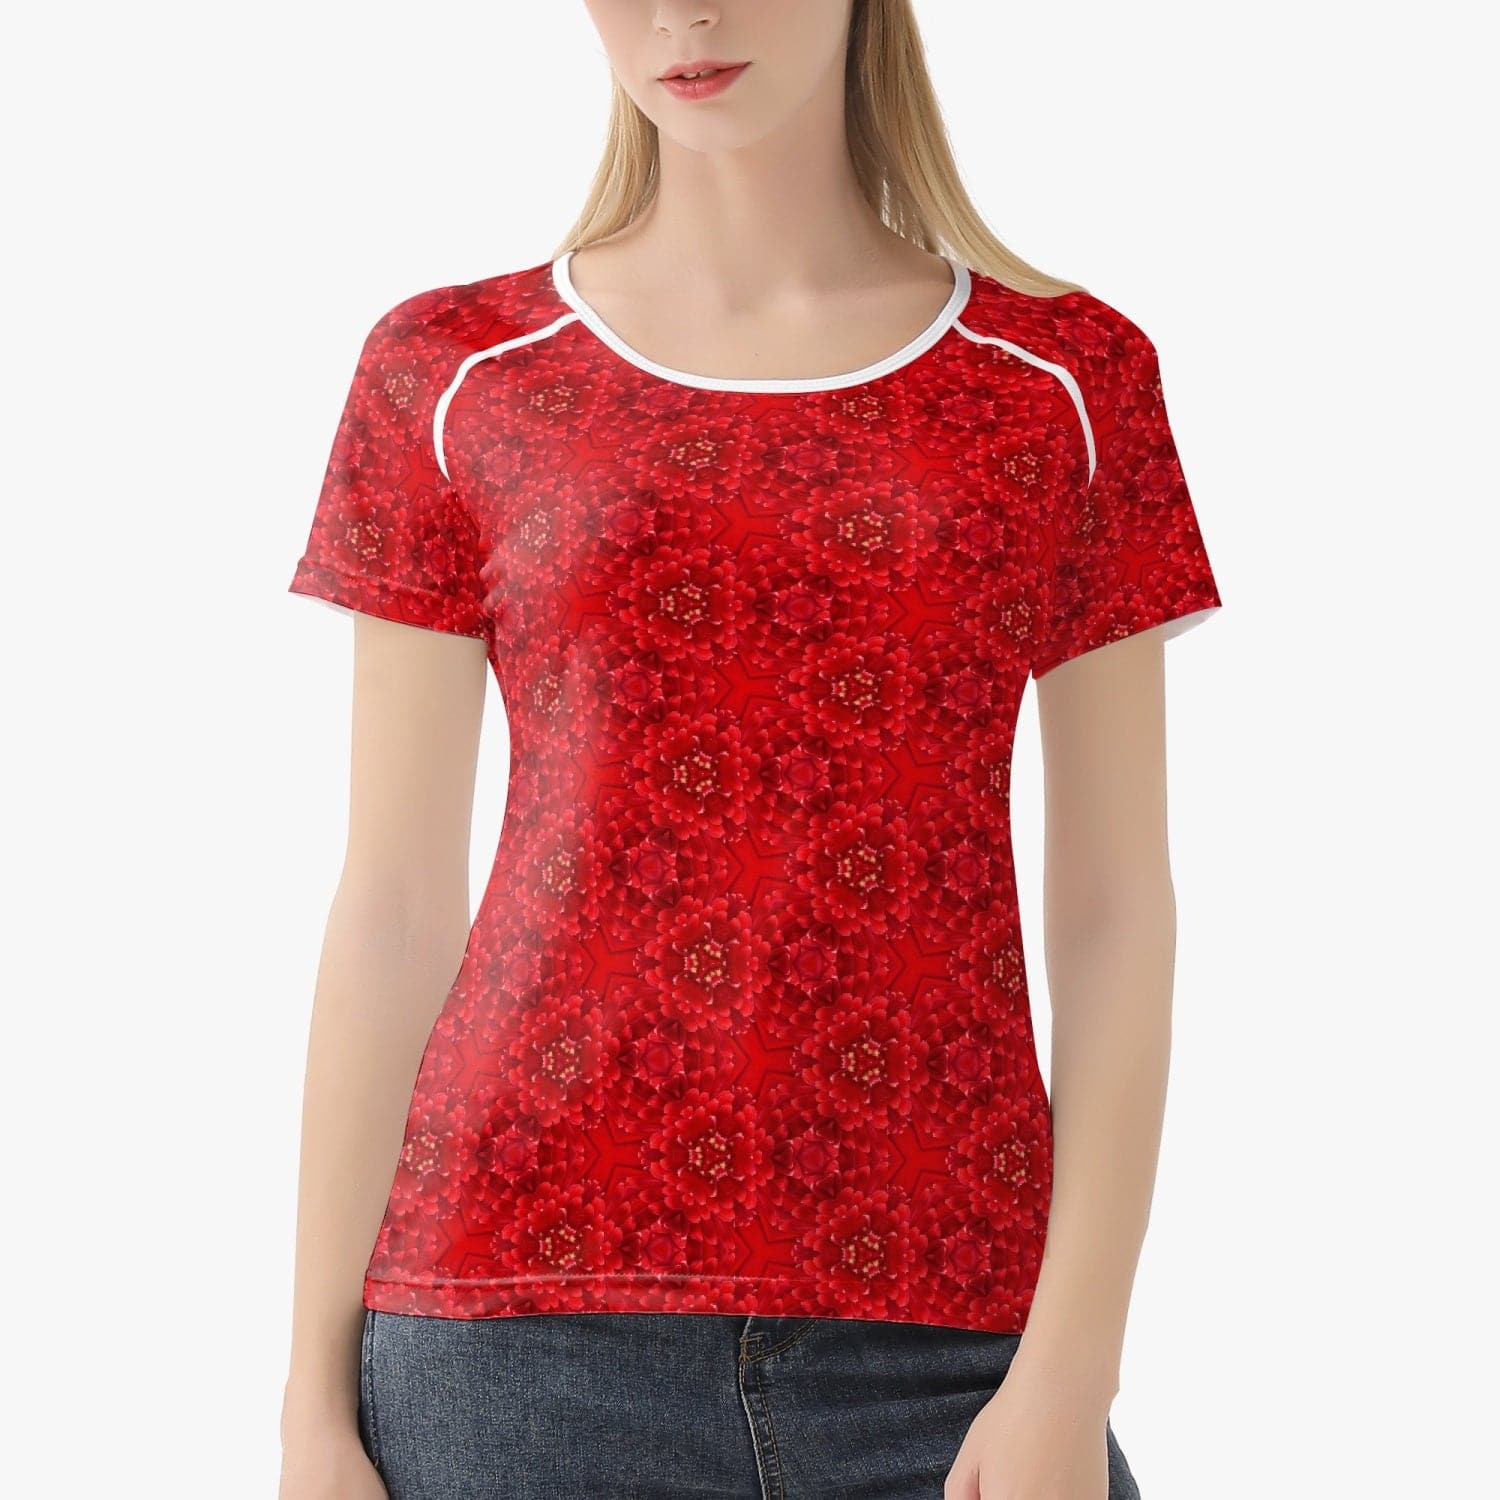 Red Root Chacra  Handmade Yoga Top for  Women sports T-shirt, by Sensus Studio Design